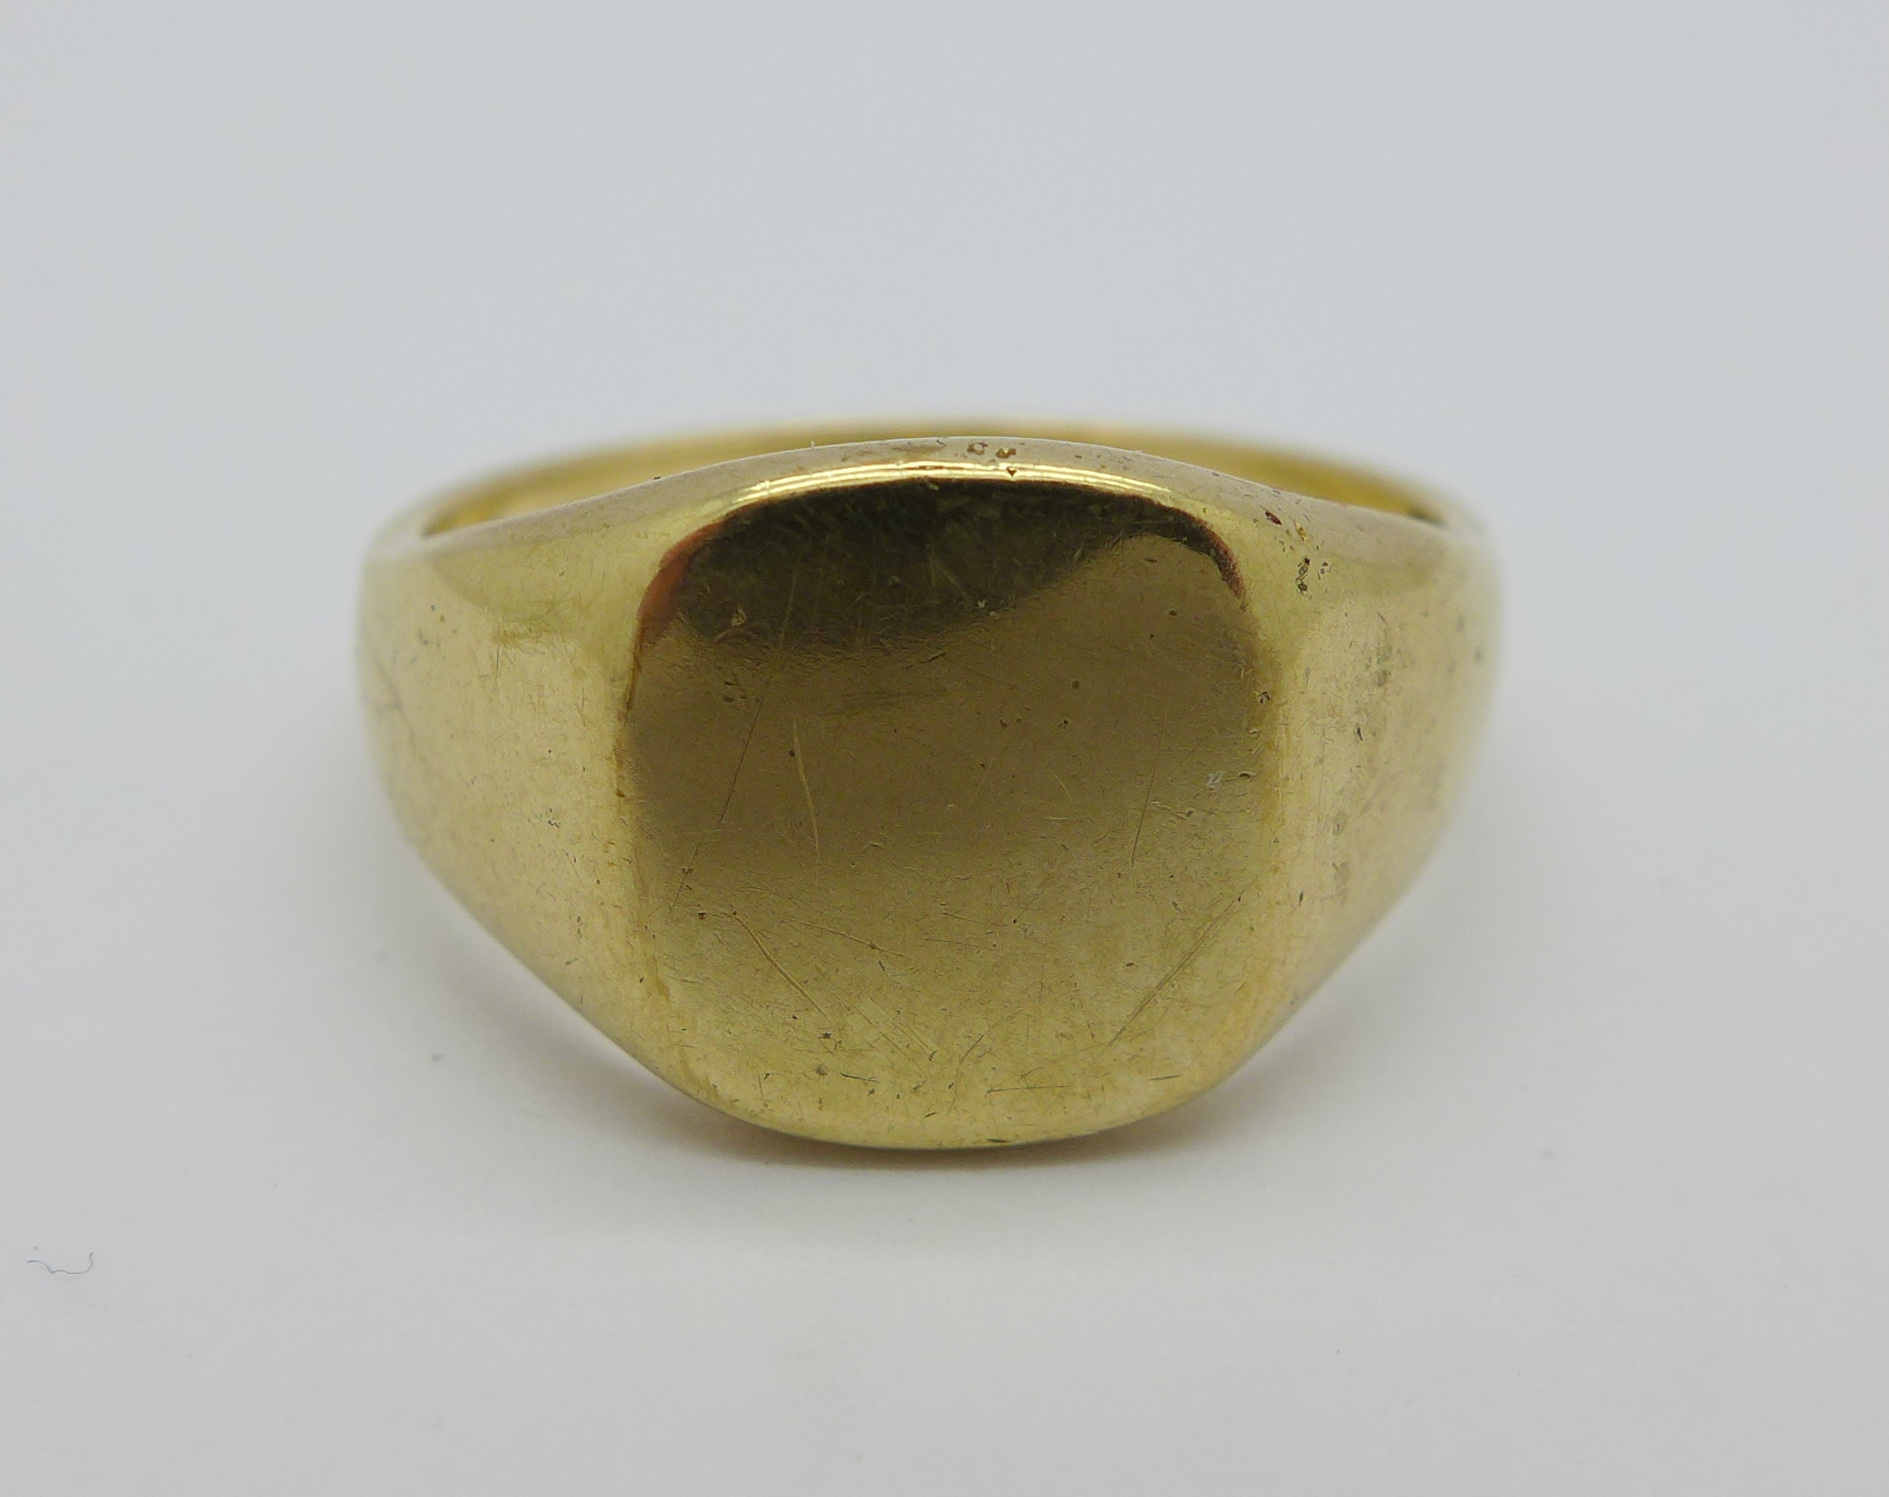 A 9ct gold signet ring, 8.